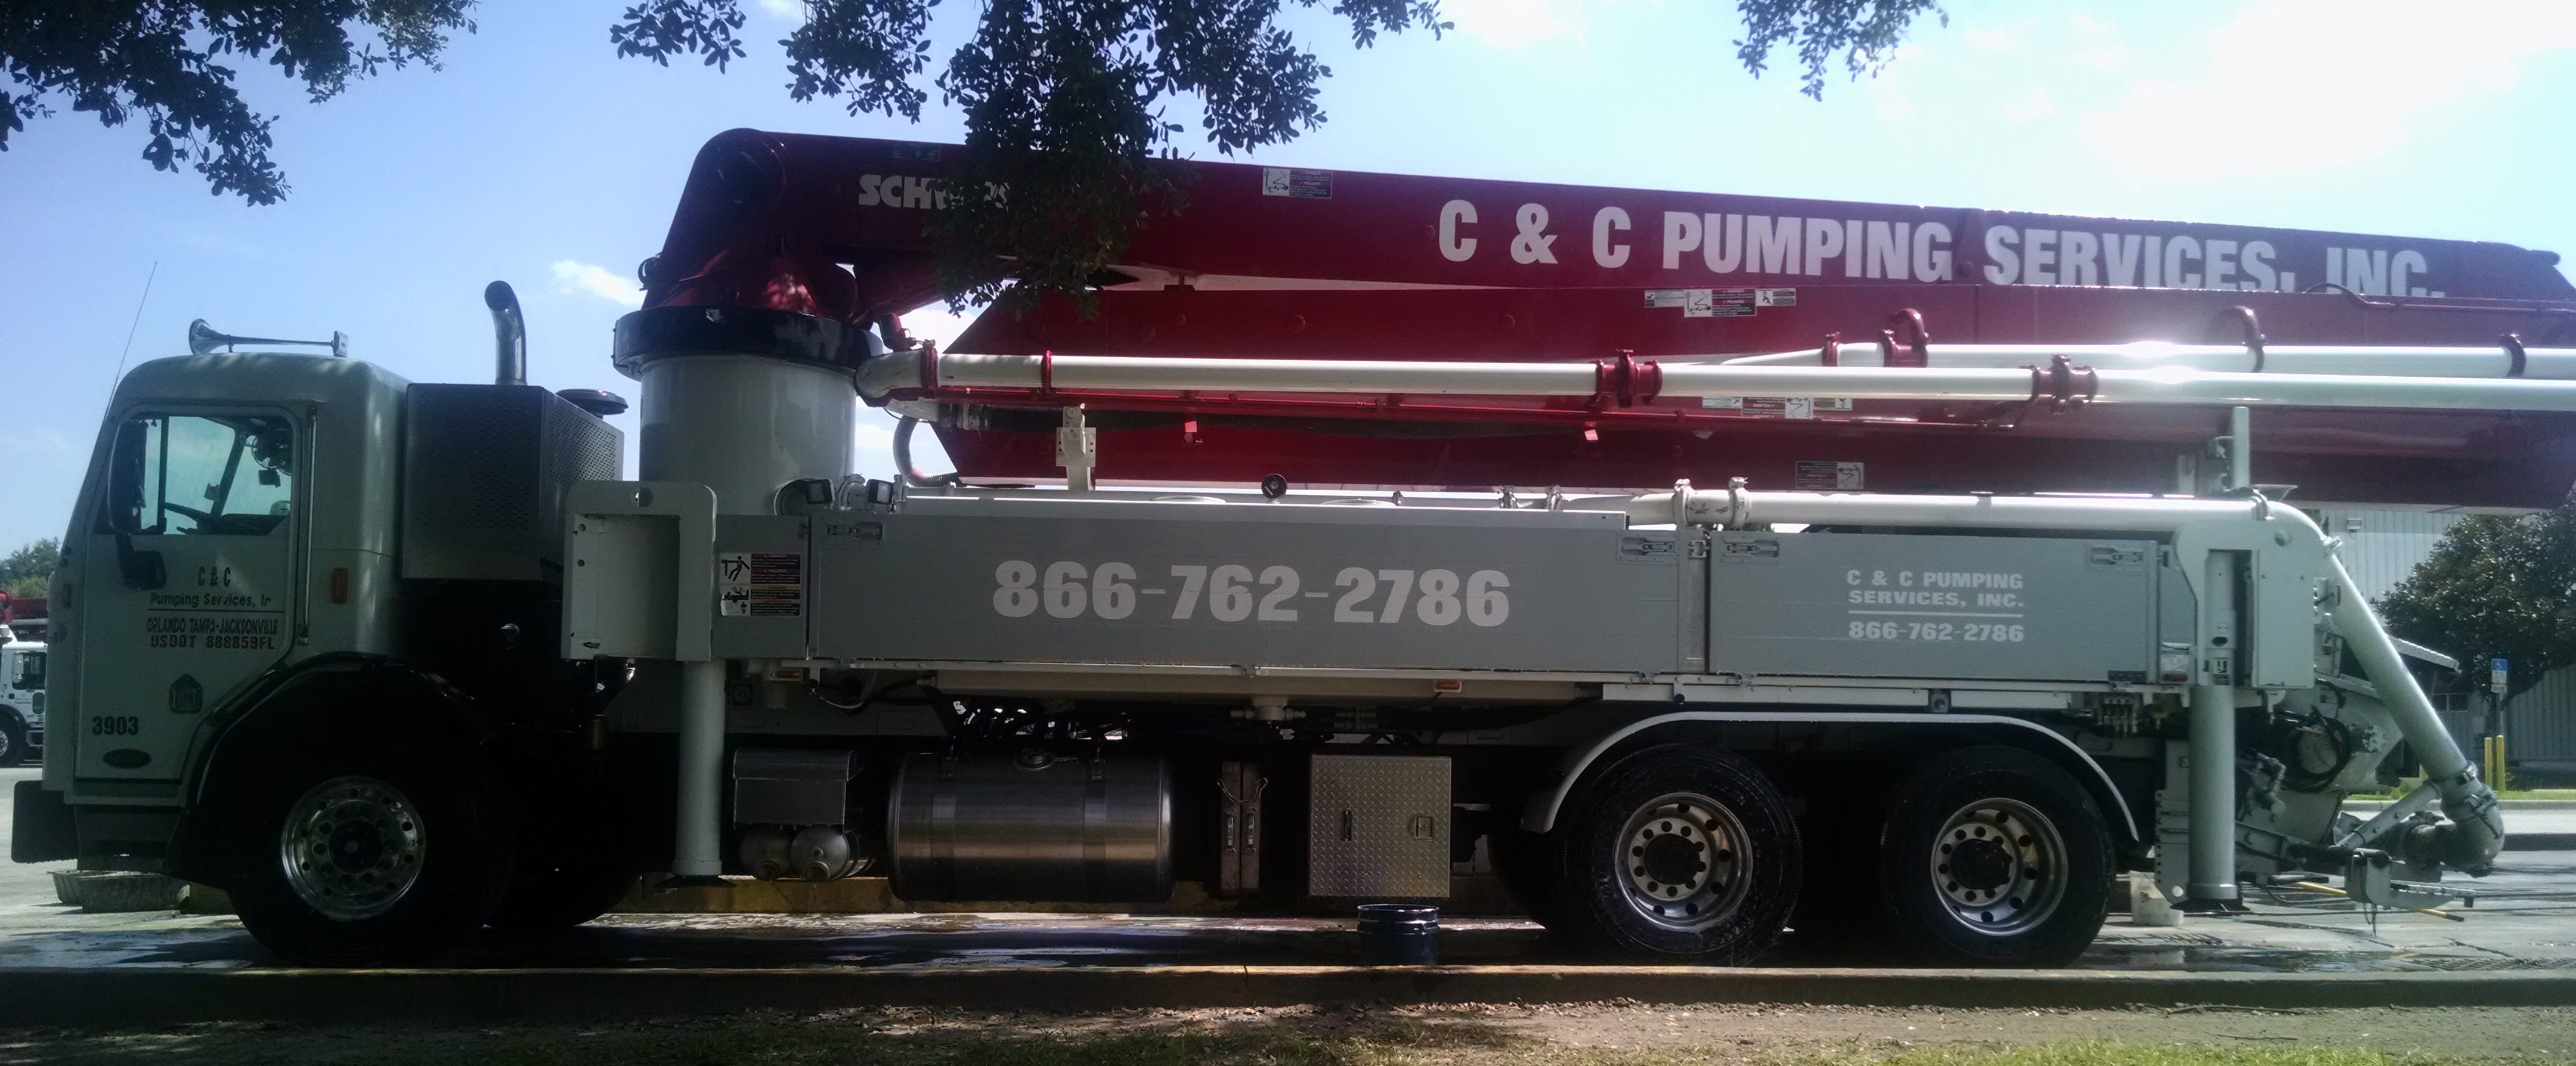 39 Meter concrete boom pump, provided by C&C Pumping Services Inc. 